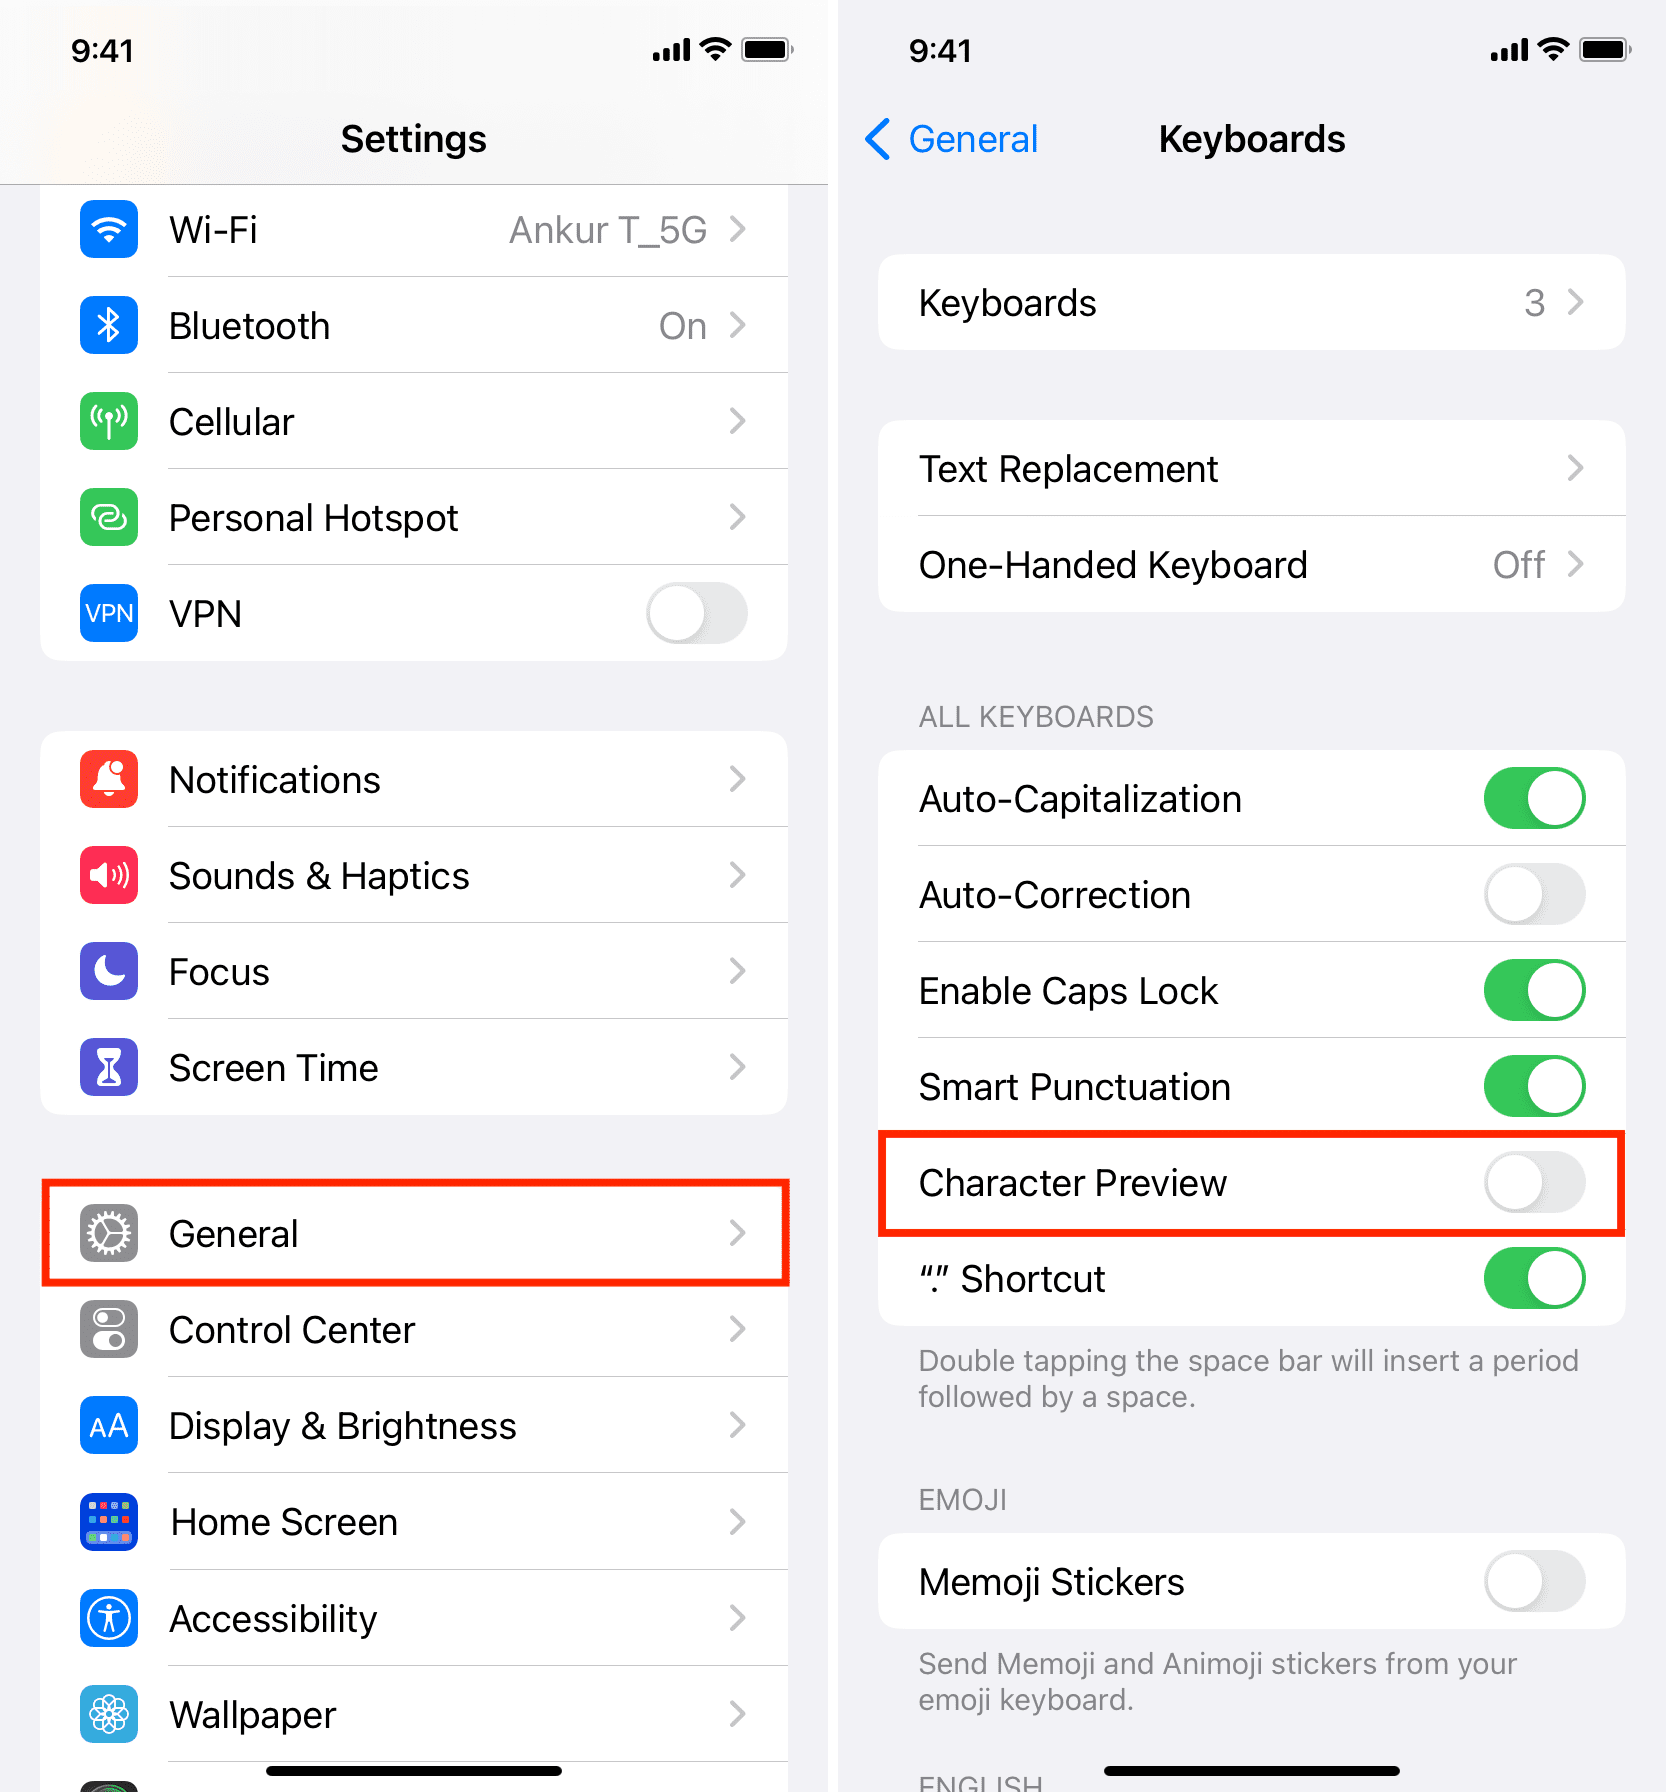 Character Preview turned off in iPhone keyboard settings